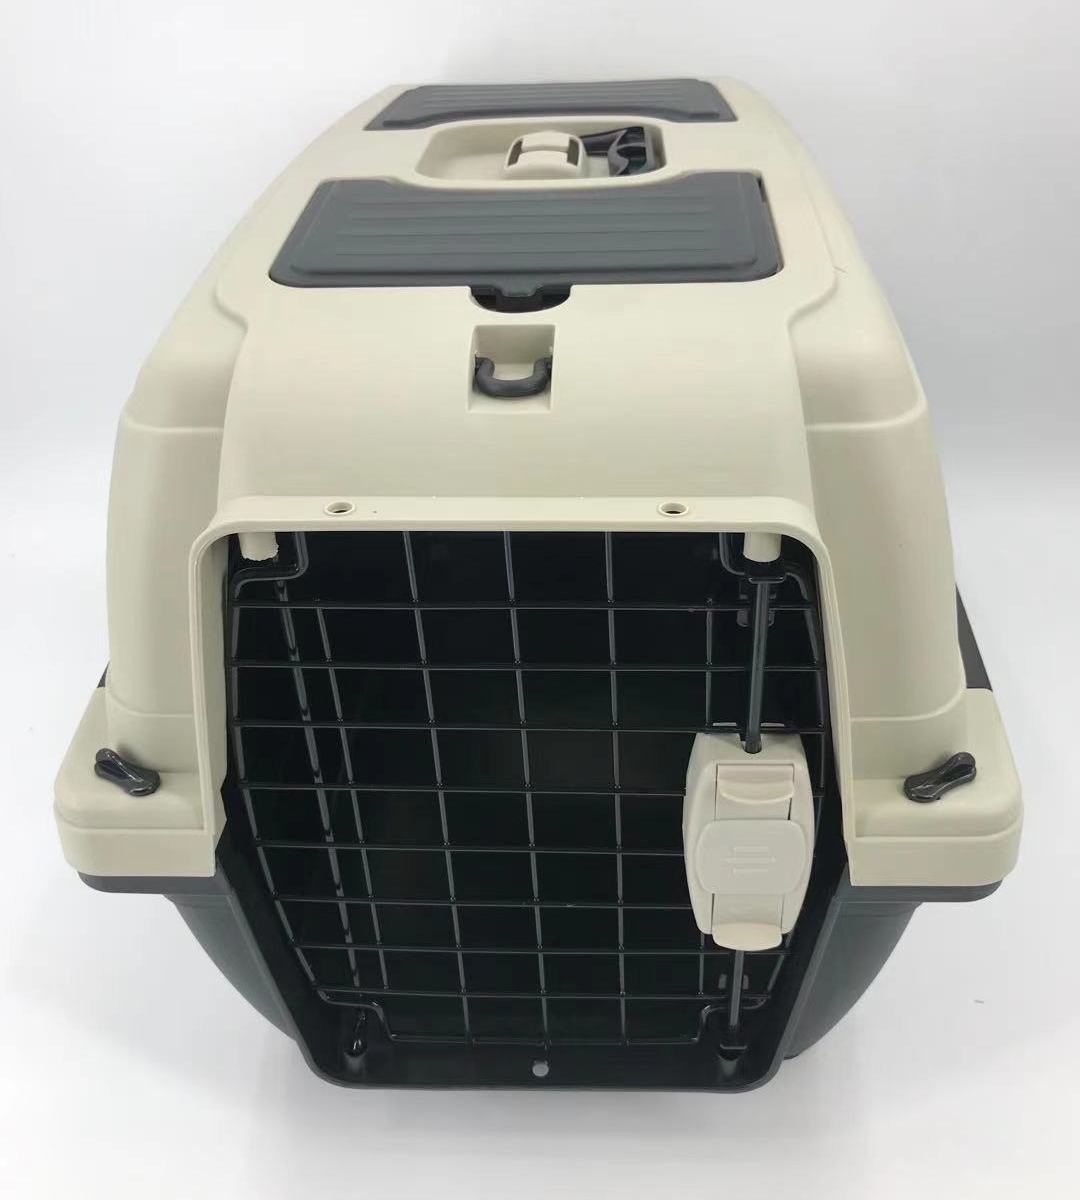 YES4PETS Medium Portable Dog Cat House Pet Carrier Travel Bag Cage+Safety Lock & Food Box - SILBERSHELL